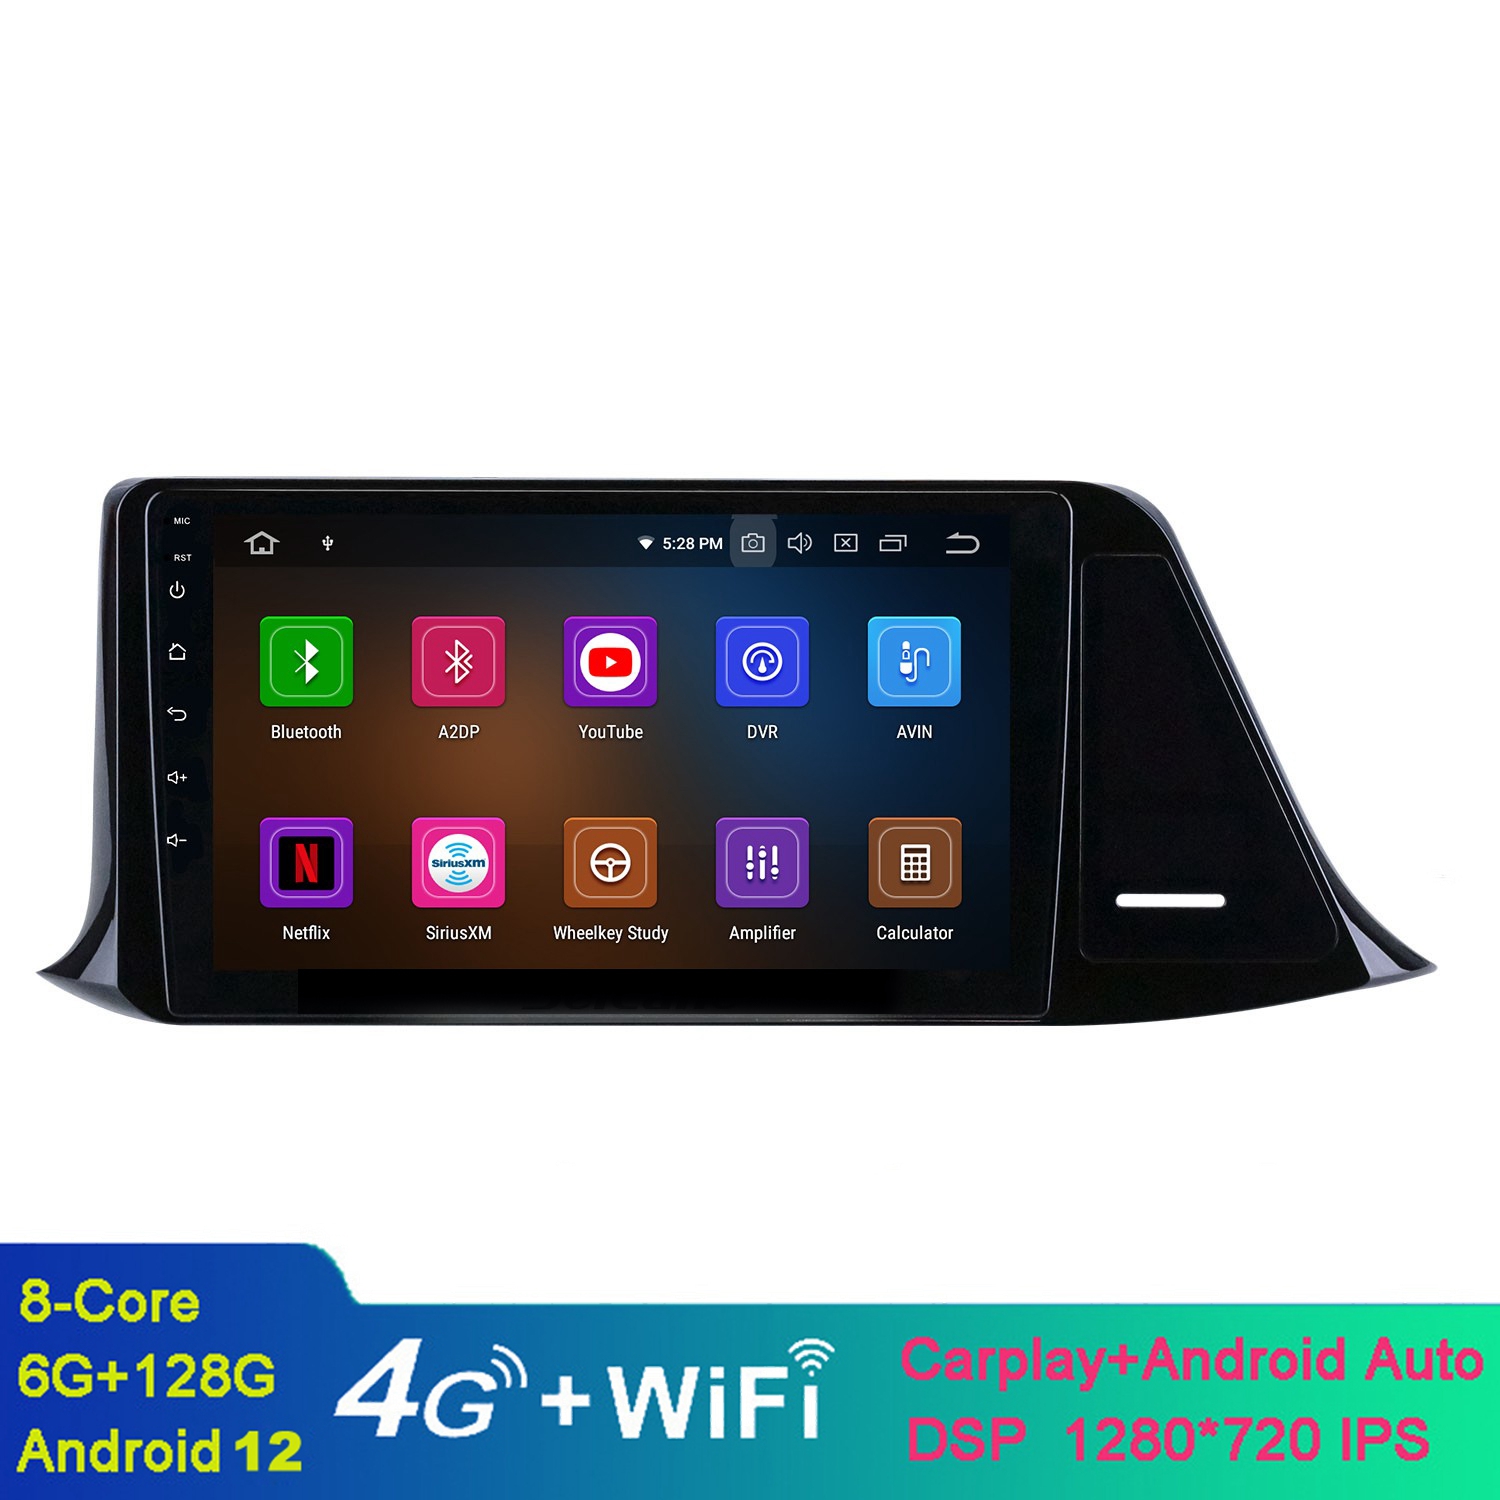 HD Touchscreen Car Video Head unit 9 inch Android GPS Navigation for 2016-2018 Toyota C-HR with Bluetooth USB WIFI support SWC